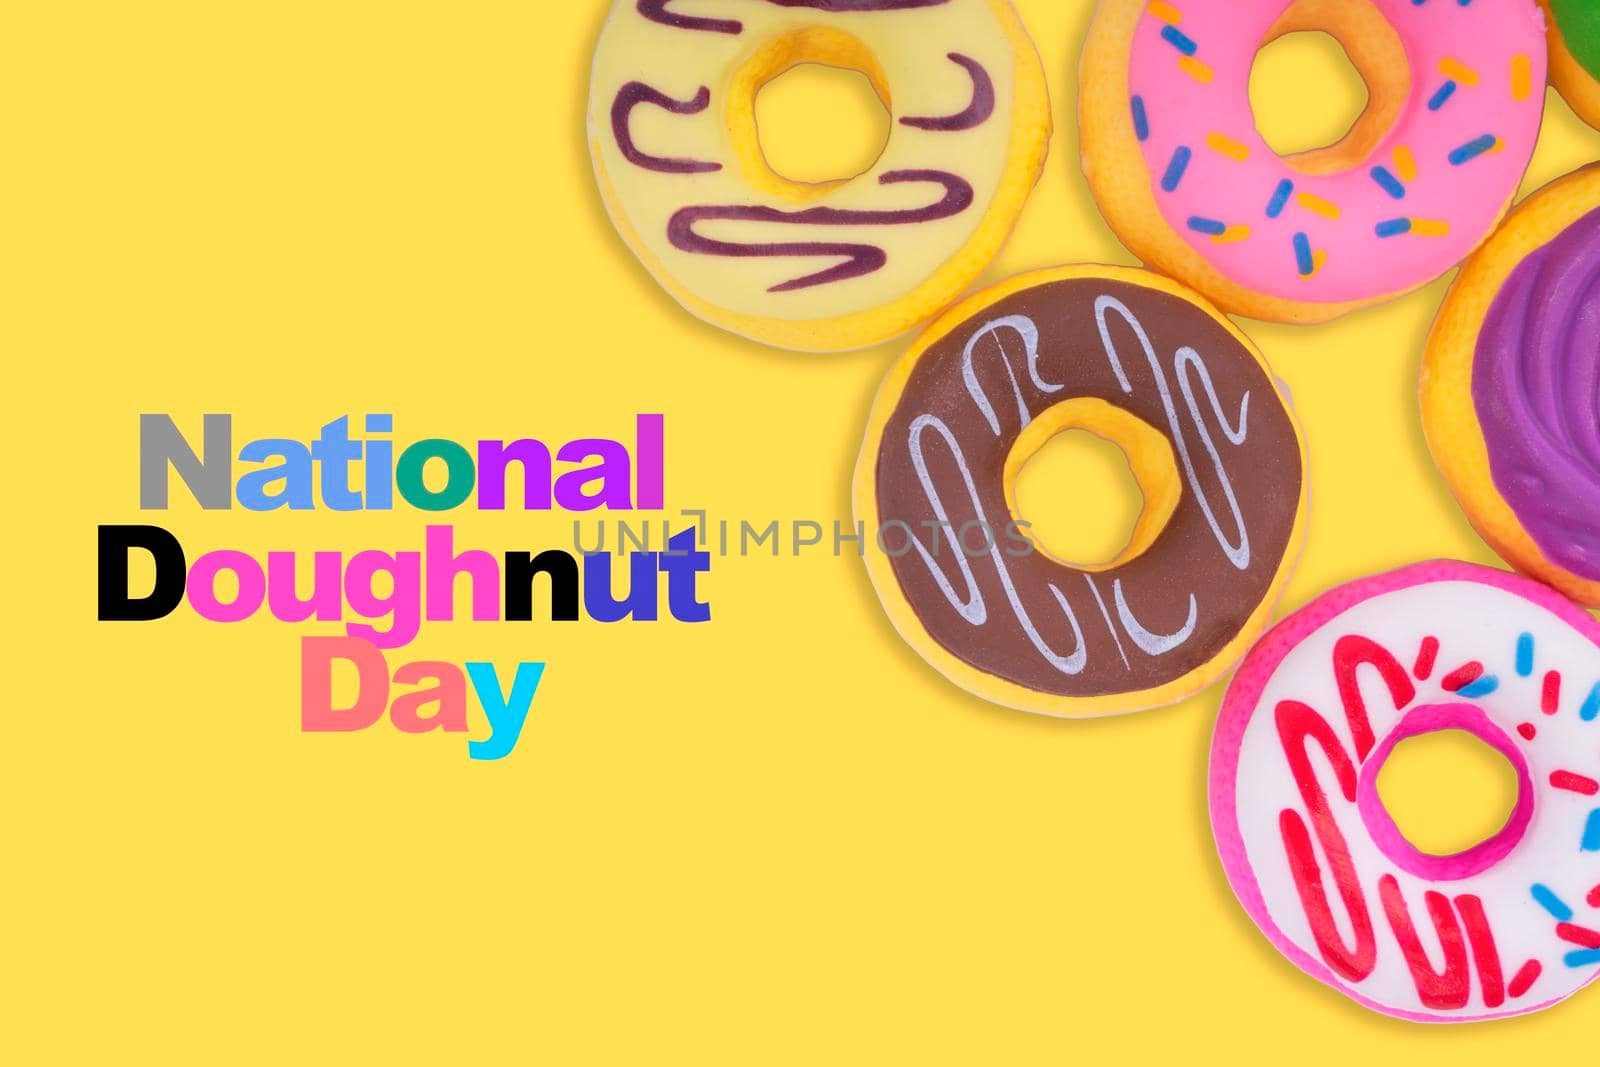 NATIONAL DOUGHNUT DAY text on yellow background by silverwings